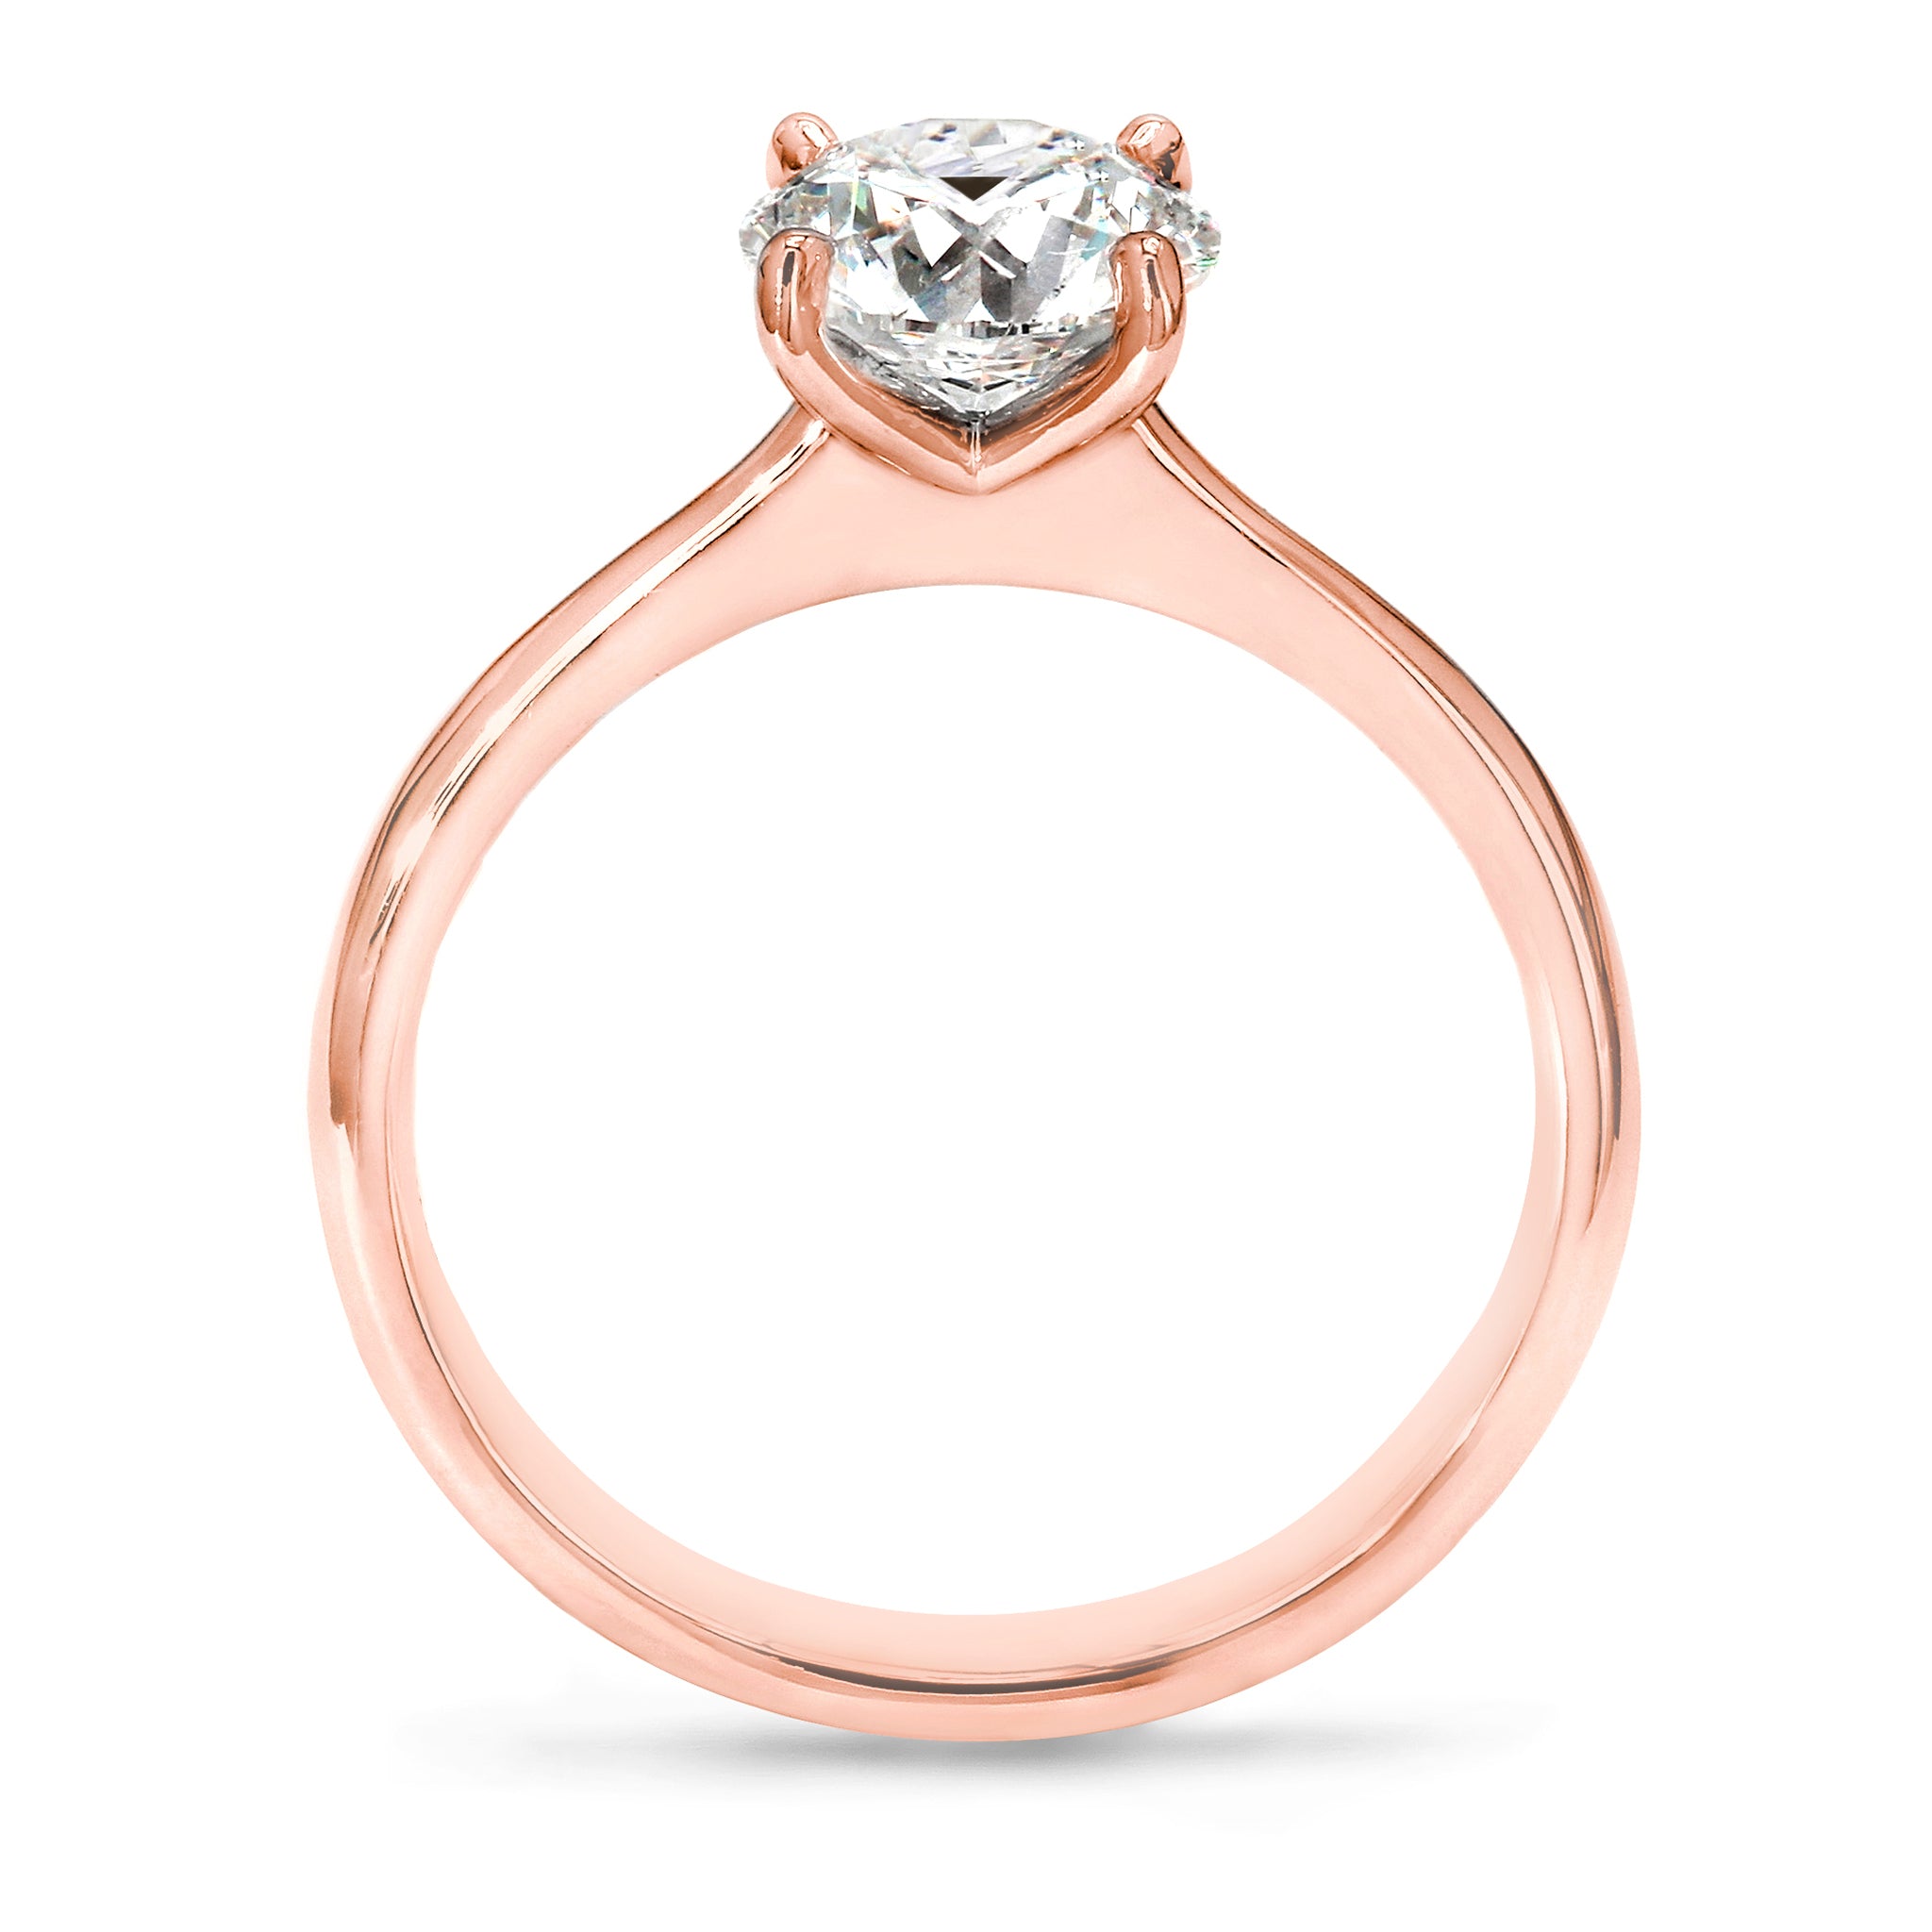 Shimansky - Victoria Solitaire Diamond Ring 0.40ct crafted in 18K Rose Gold